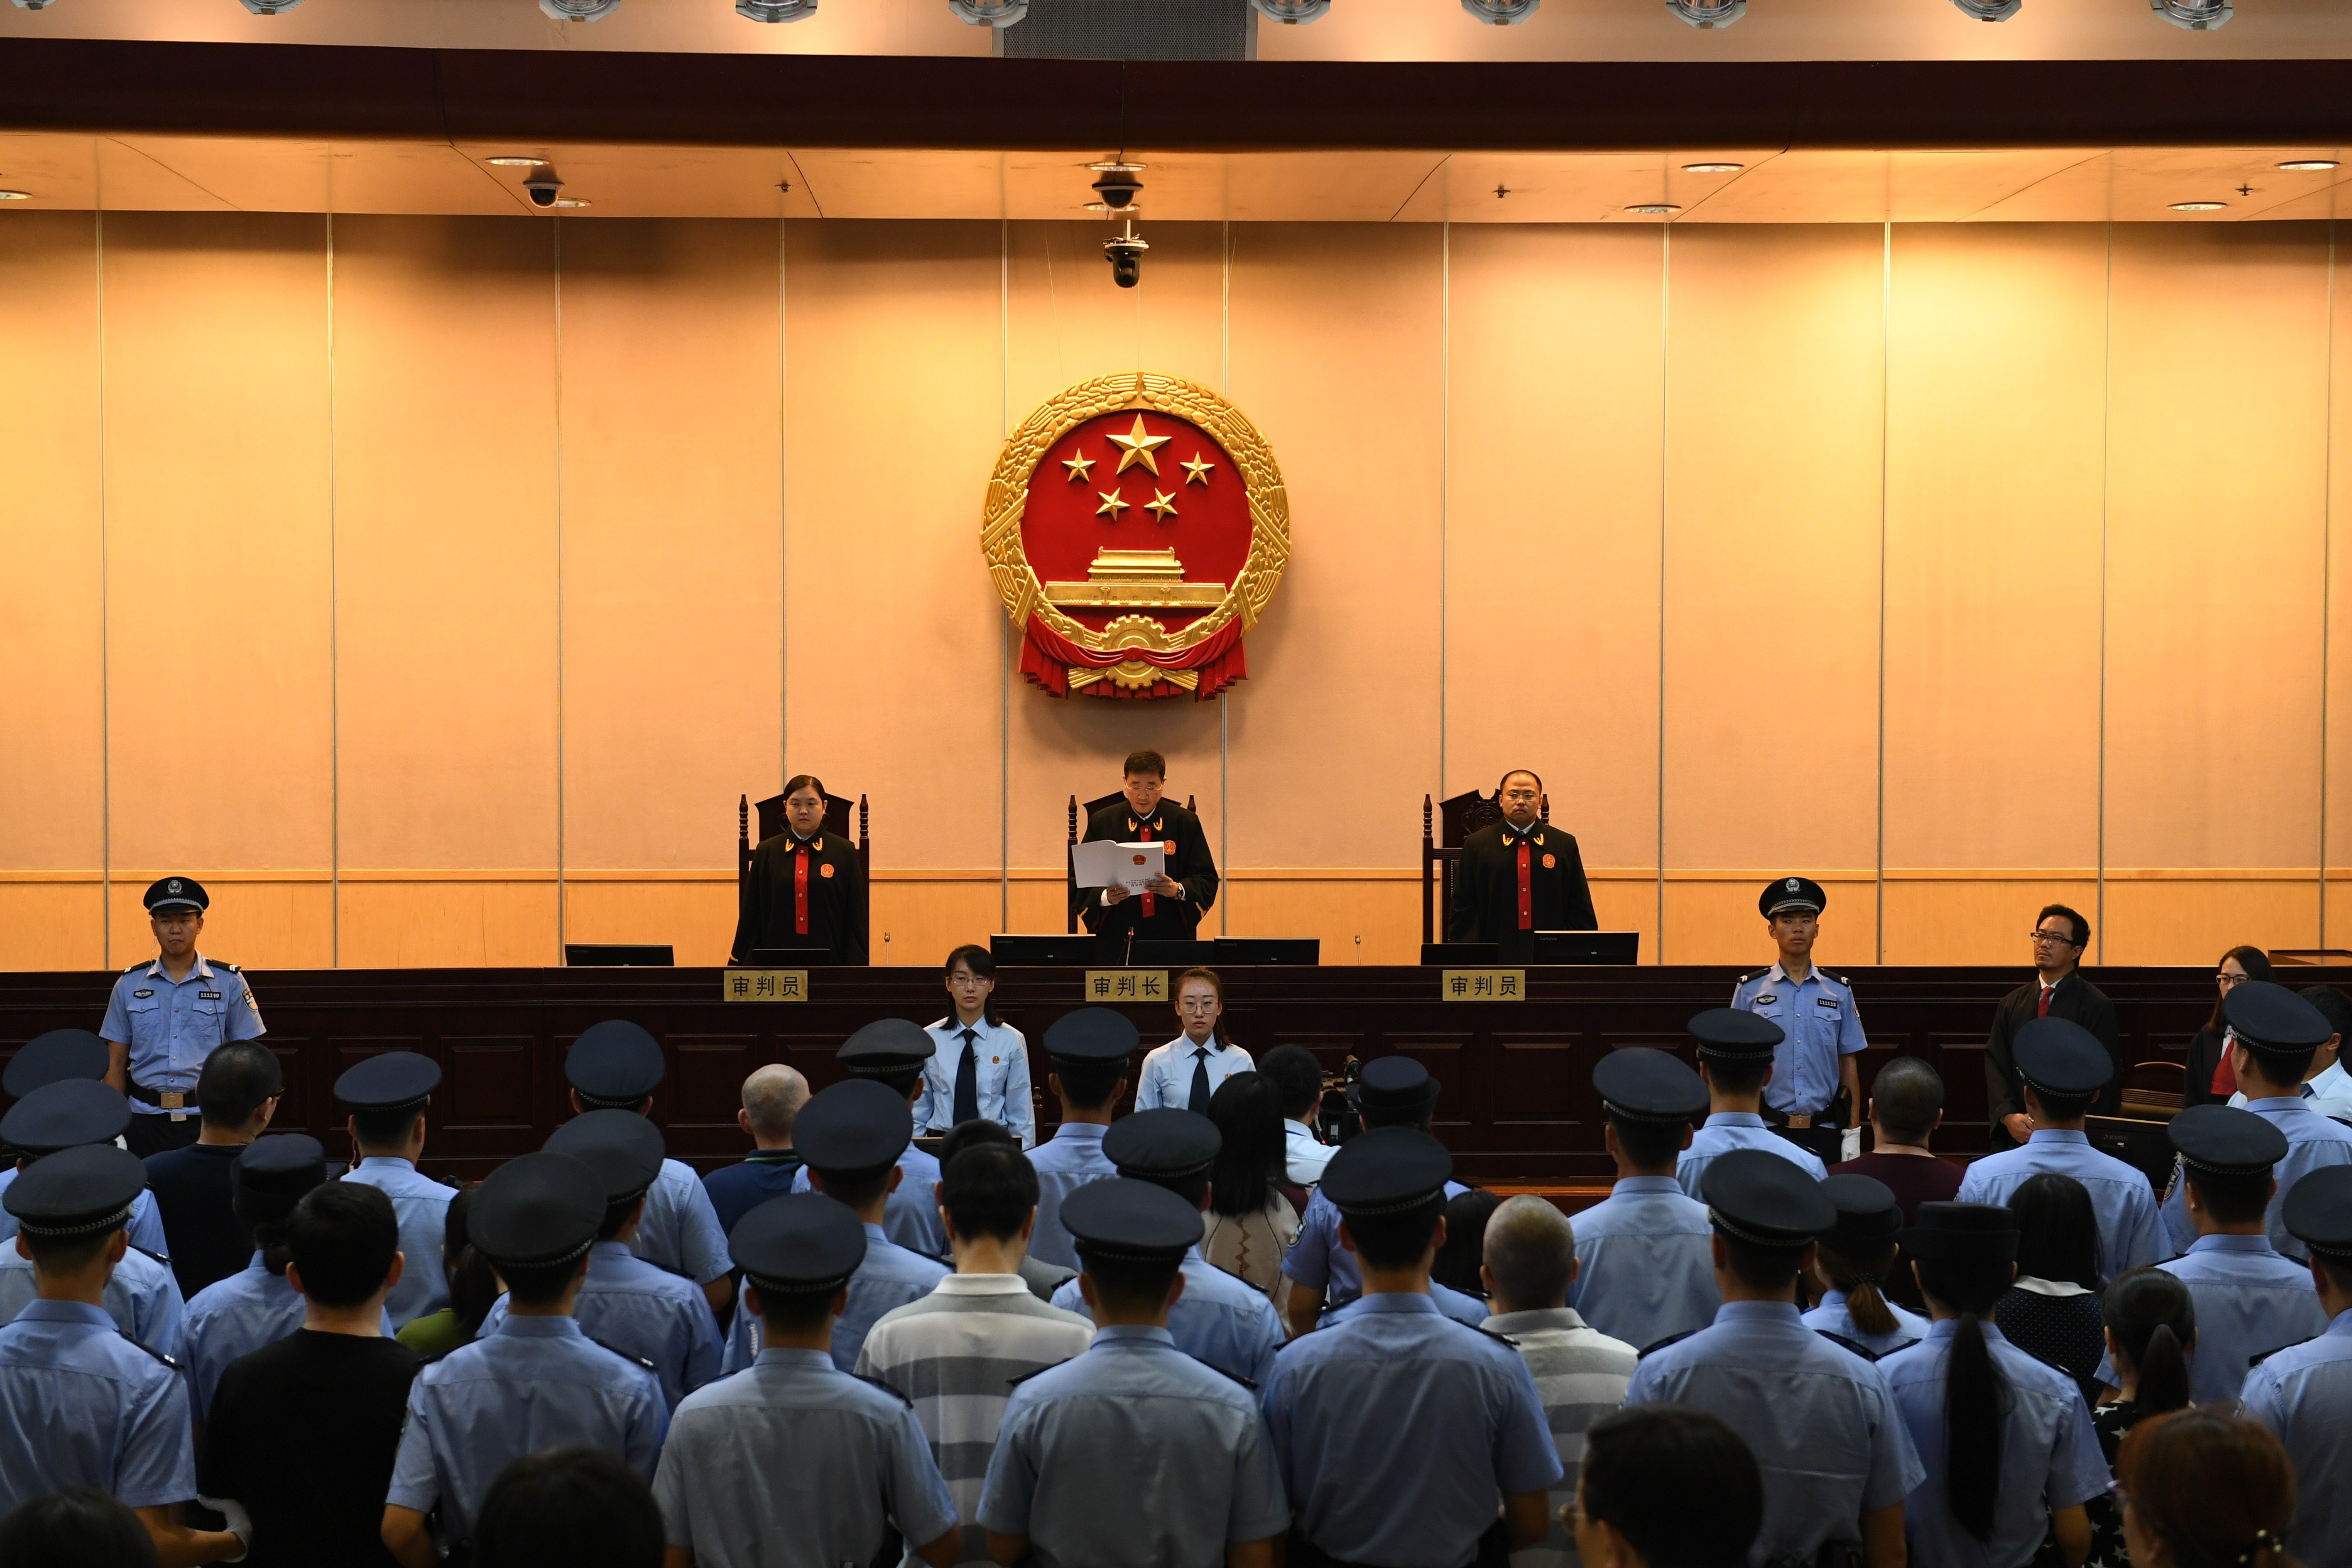 As fraudster Ding Ning is jailed for life after accumulating 50 billion yuan from investor, China shows it must not risk instability to society. Photo: Xinhua